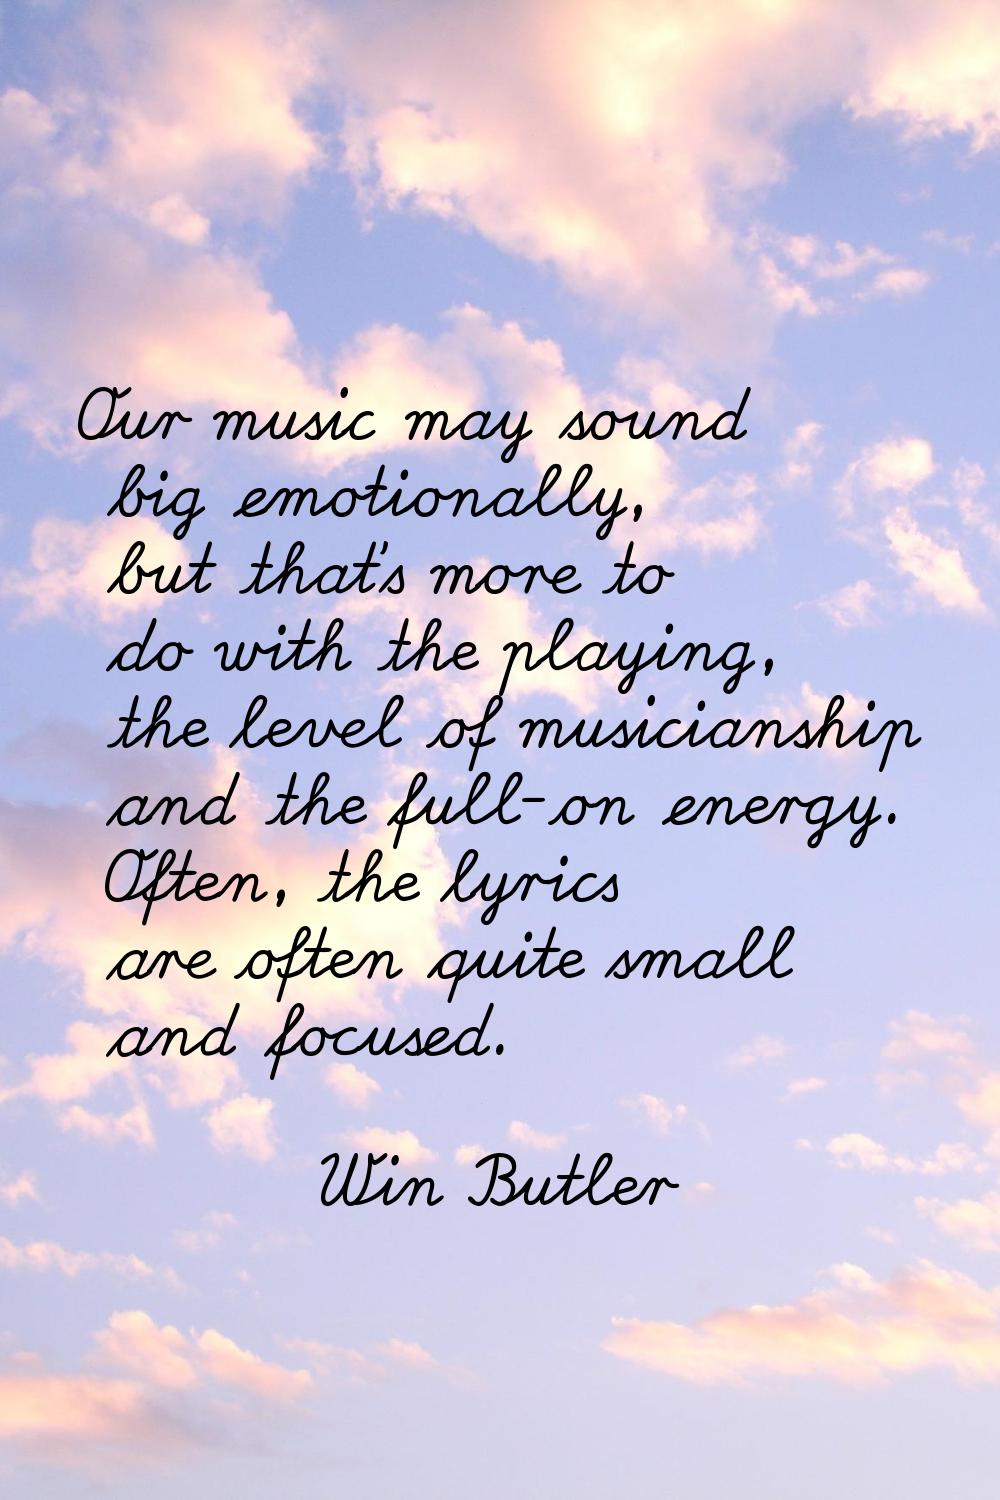 Our music may sound big emotionally, but that's more to do with the playing, the level of musicians